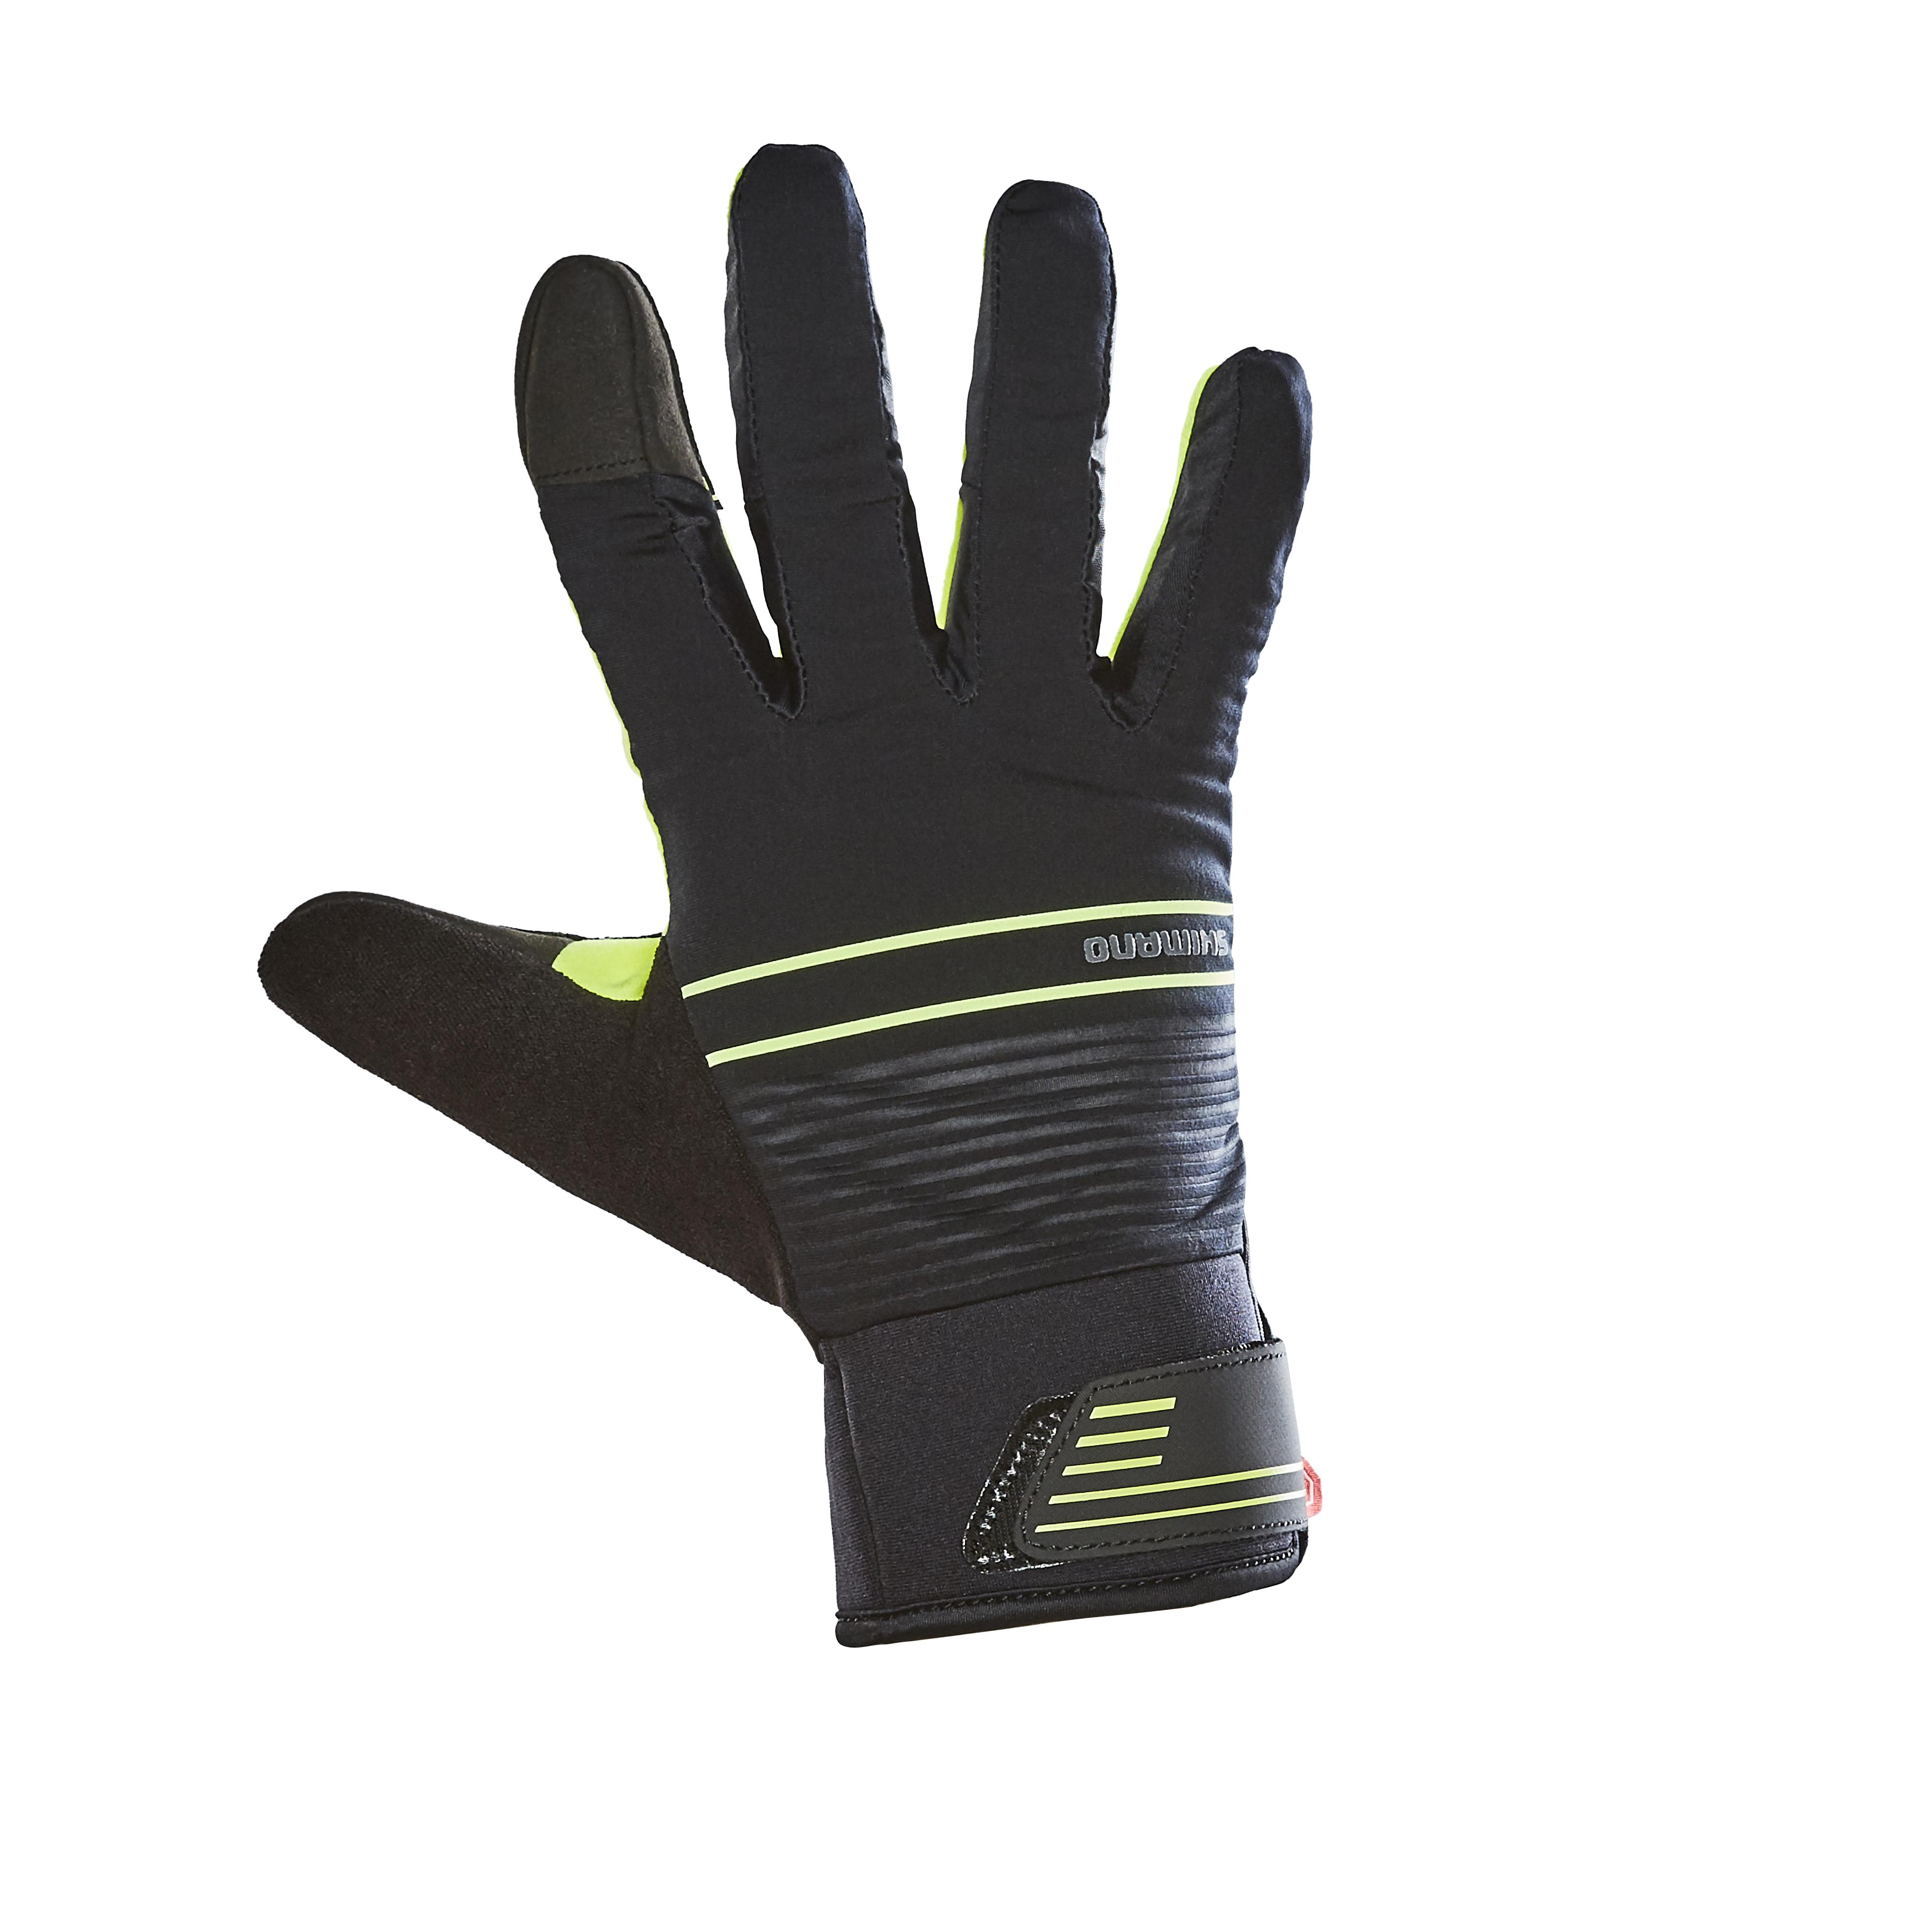 windstopper cycling